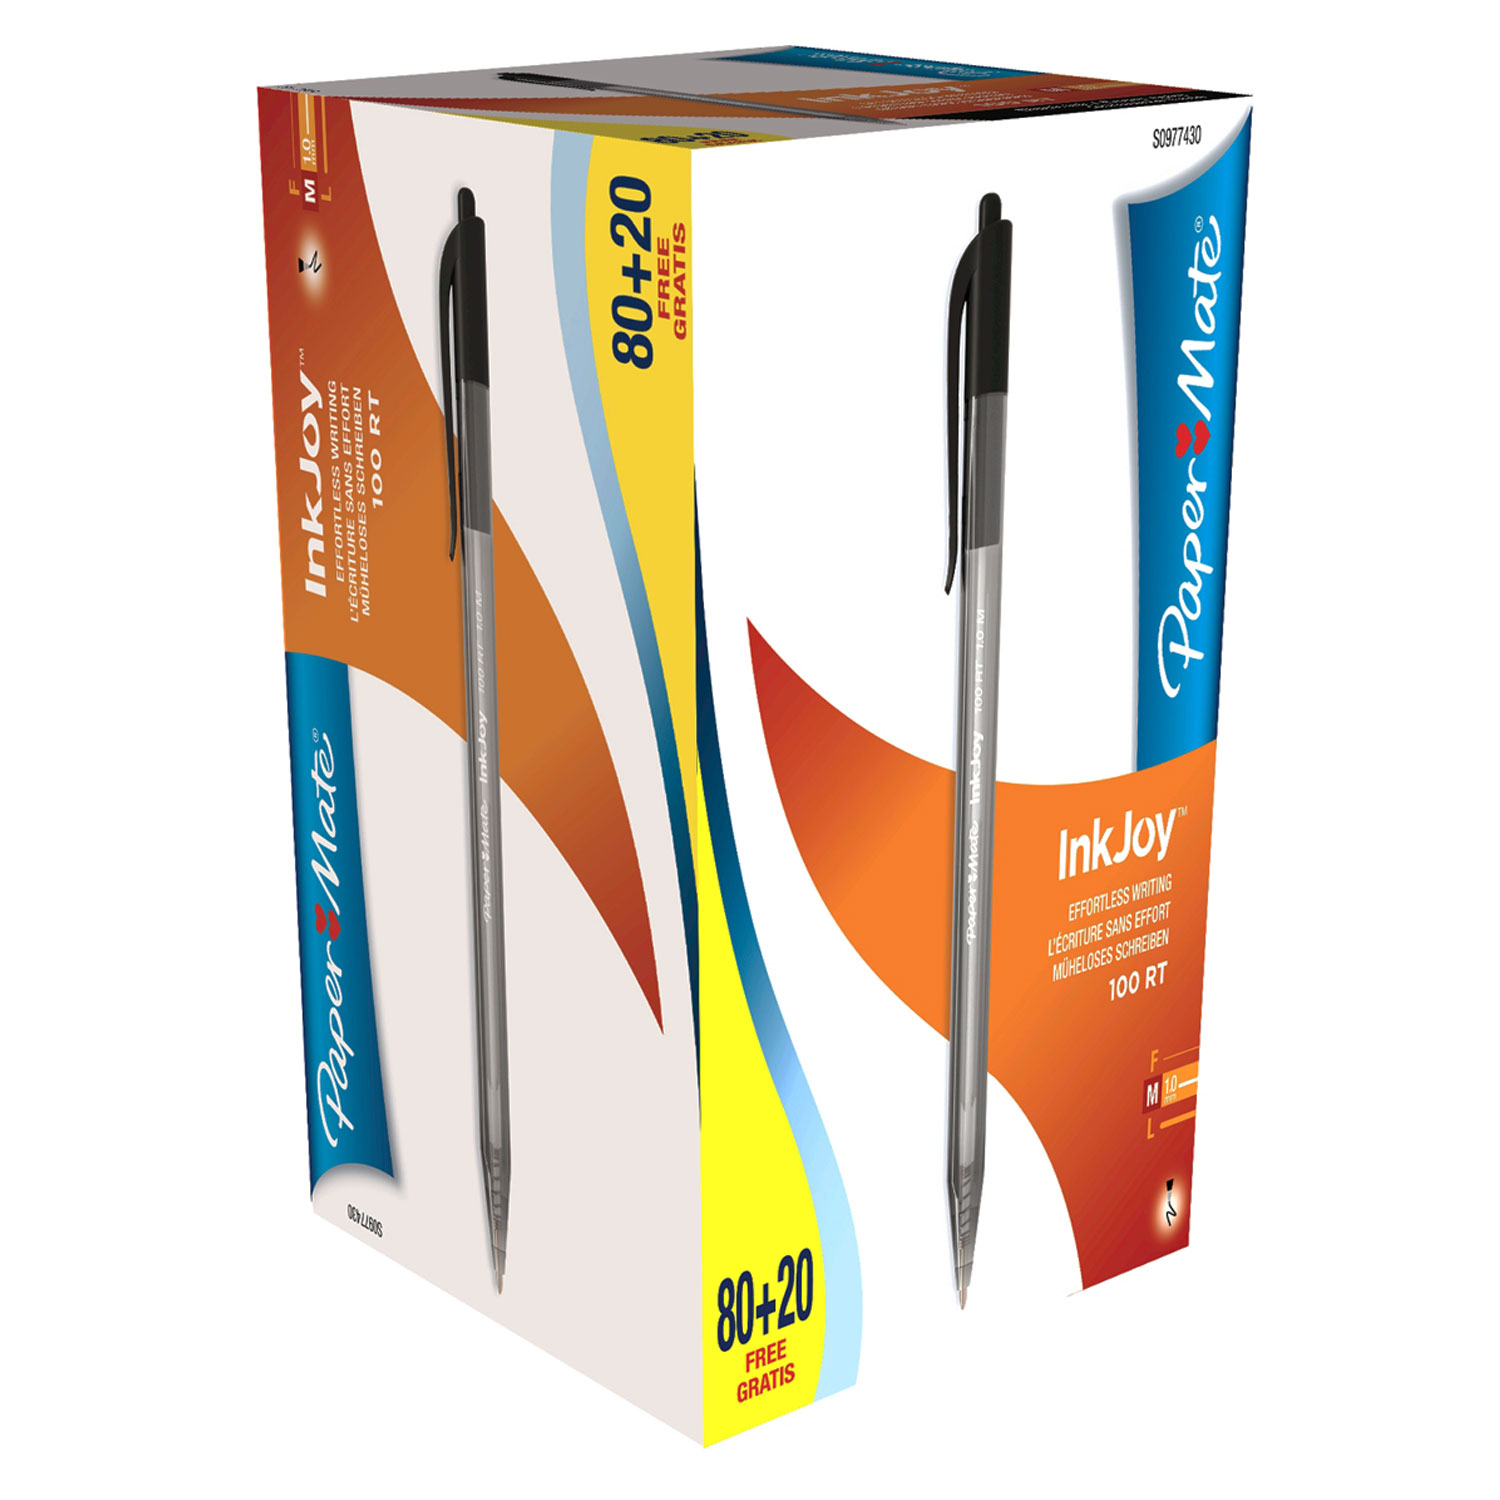 Special Pack 80 20 Penna Sfera Scatto Inkjoy Stick 100rt 1 0mm Nero Papermate S0977430 3501170977439